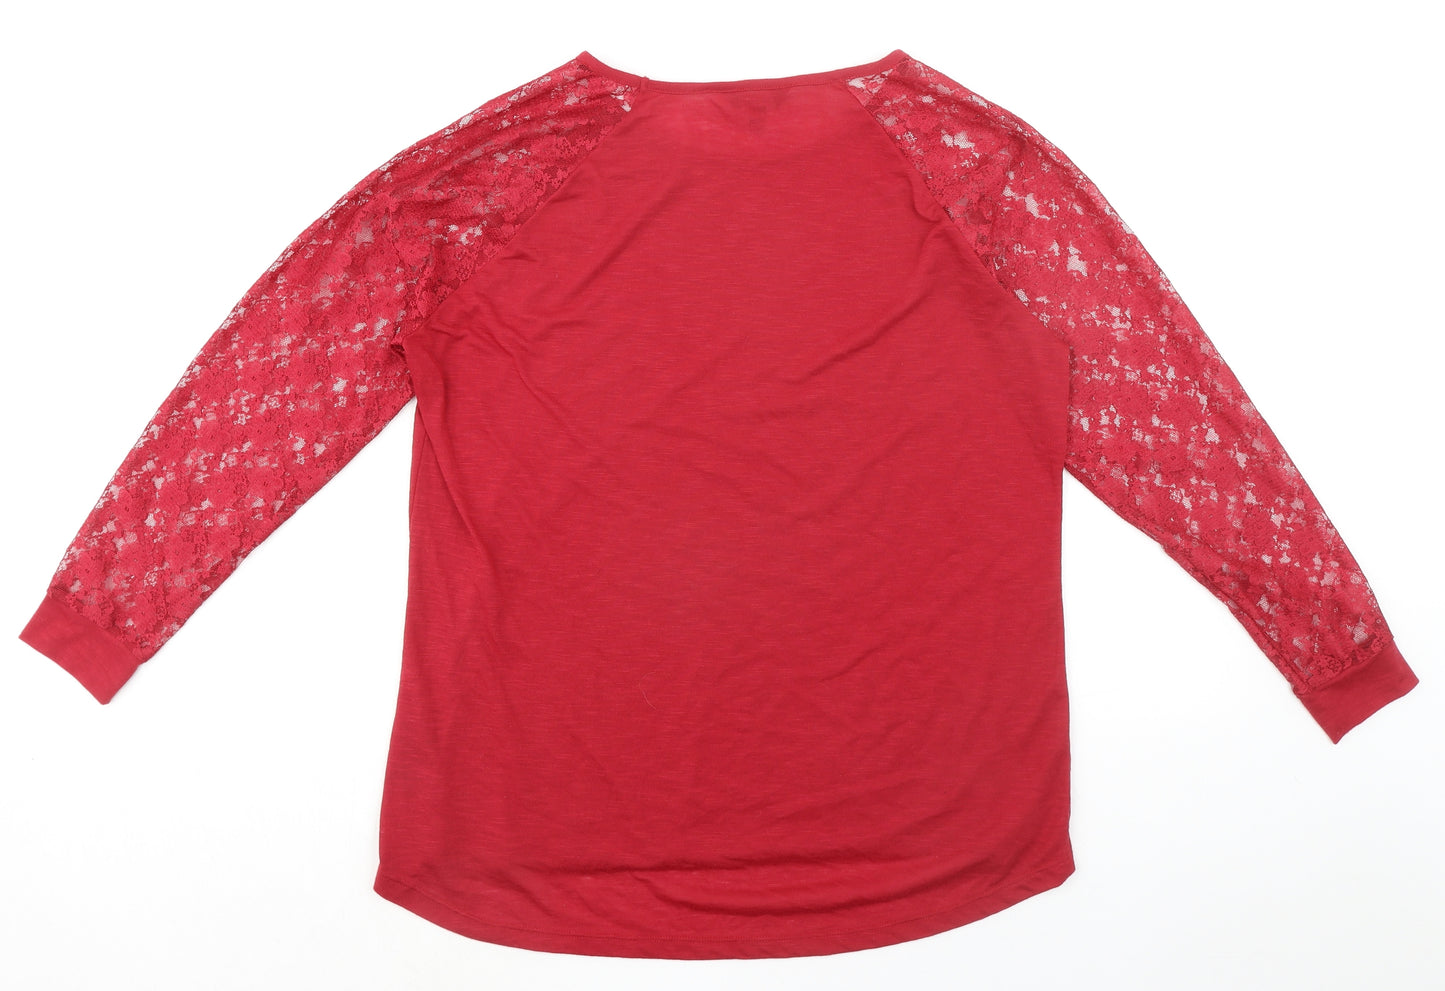 Simply Be Womens Red Polyester Basic T-Shirt Size 18 Round Neck - Lace Sleeve